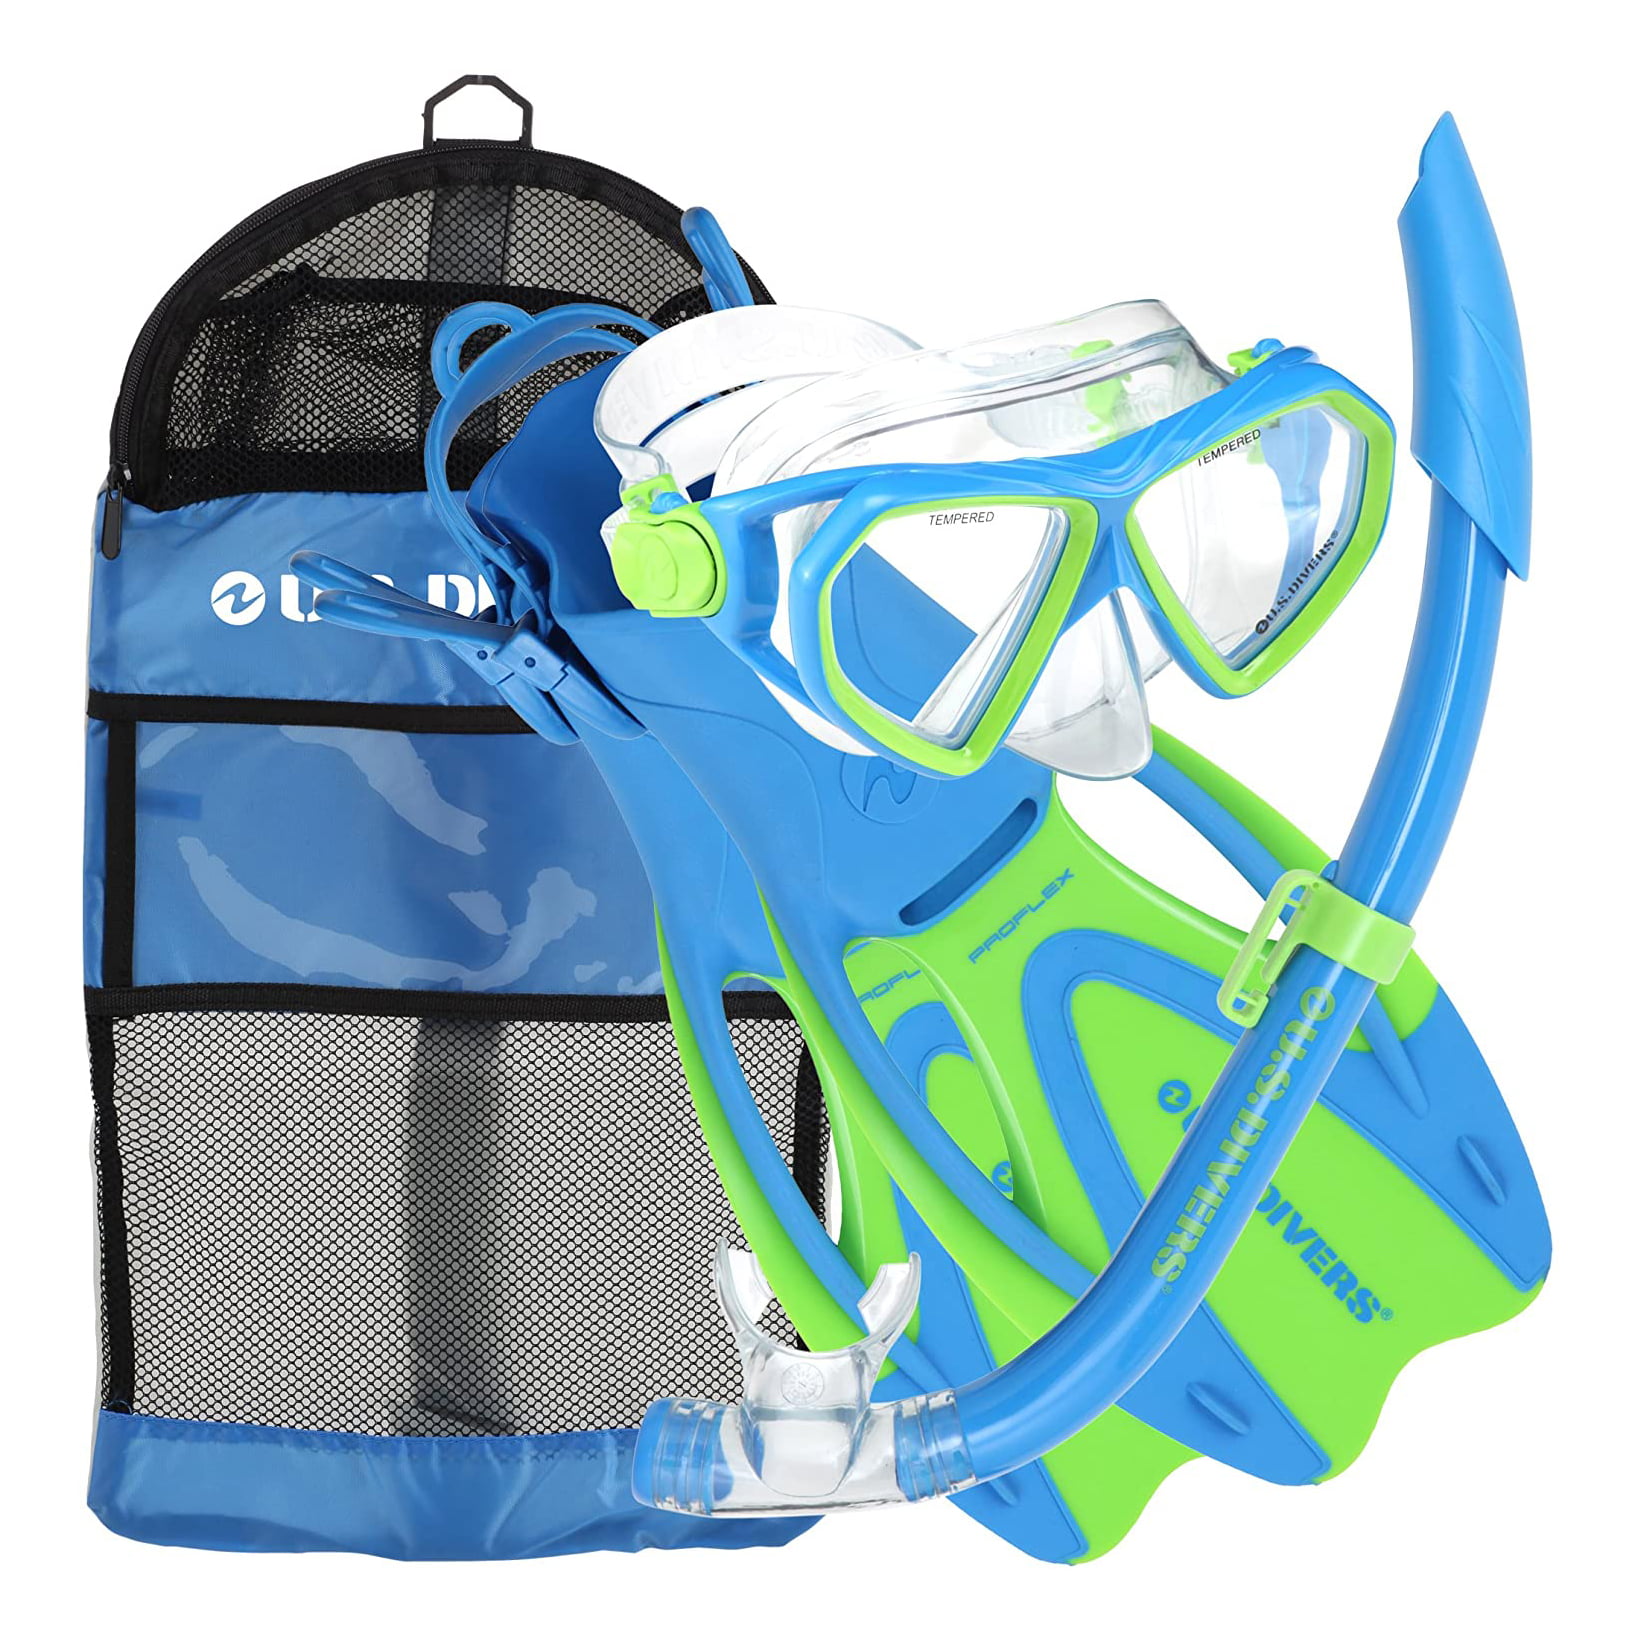 Speedo Dive Mask Snorkel and Fin Set in bag bright blue 